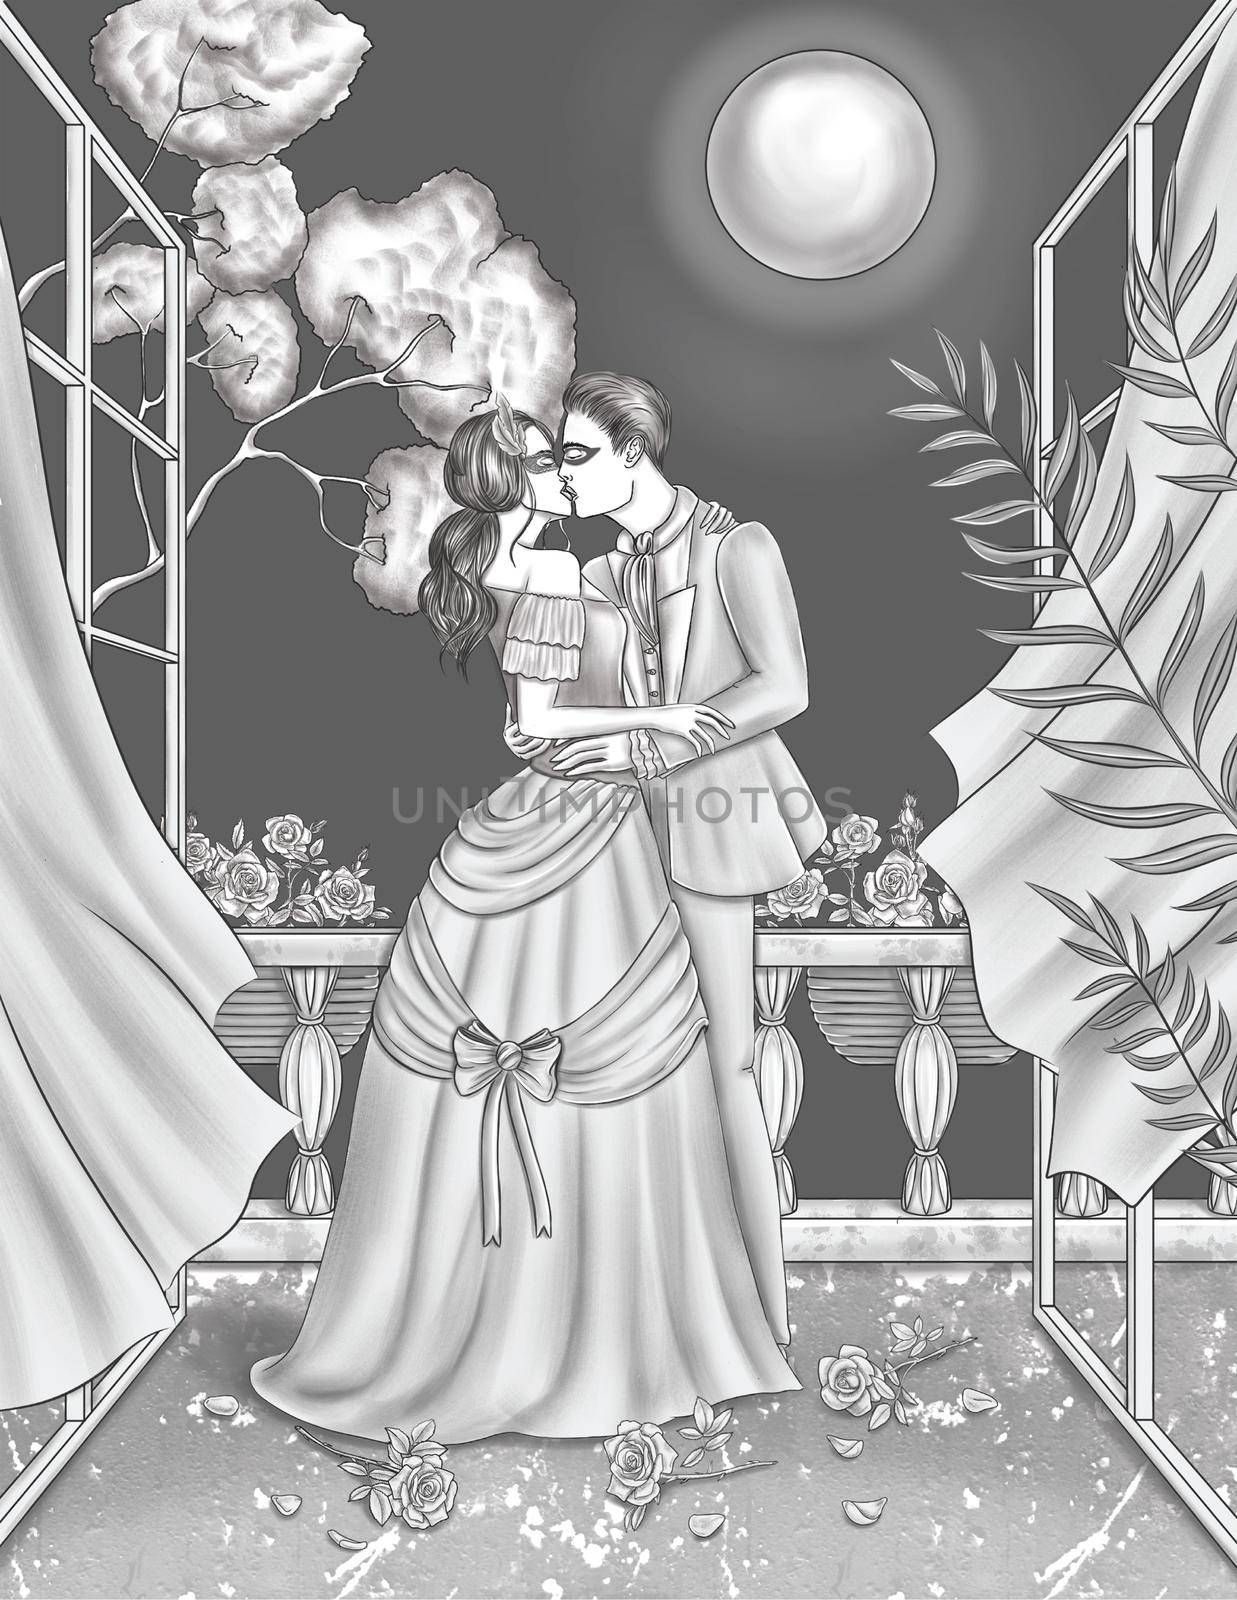 Woman In Dress Masquerade Mask Getting Kissed By A Man In Suit Holding Hugging Each Other Line Drawing. Lady And Gentleman Kiss Under Moon Light On Balcony Coloring Book Page. by nialowwa